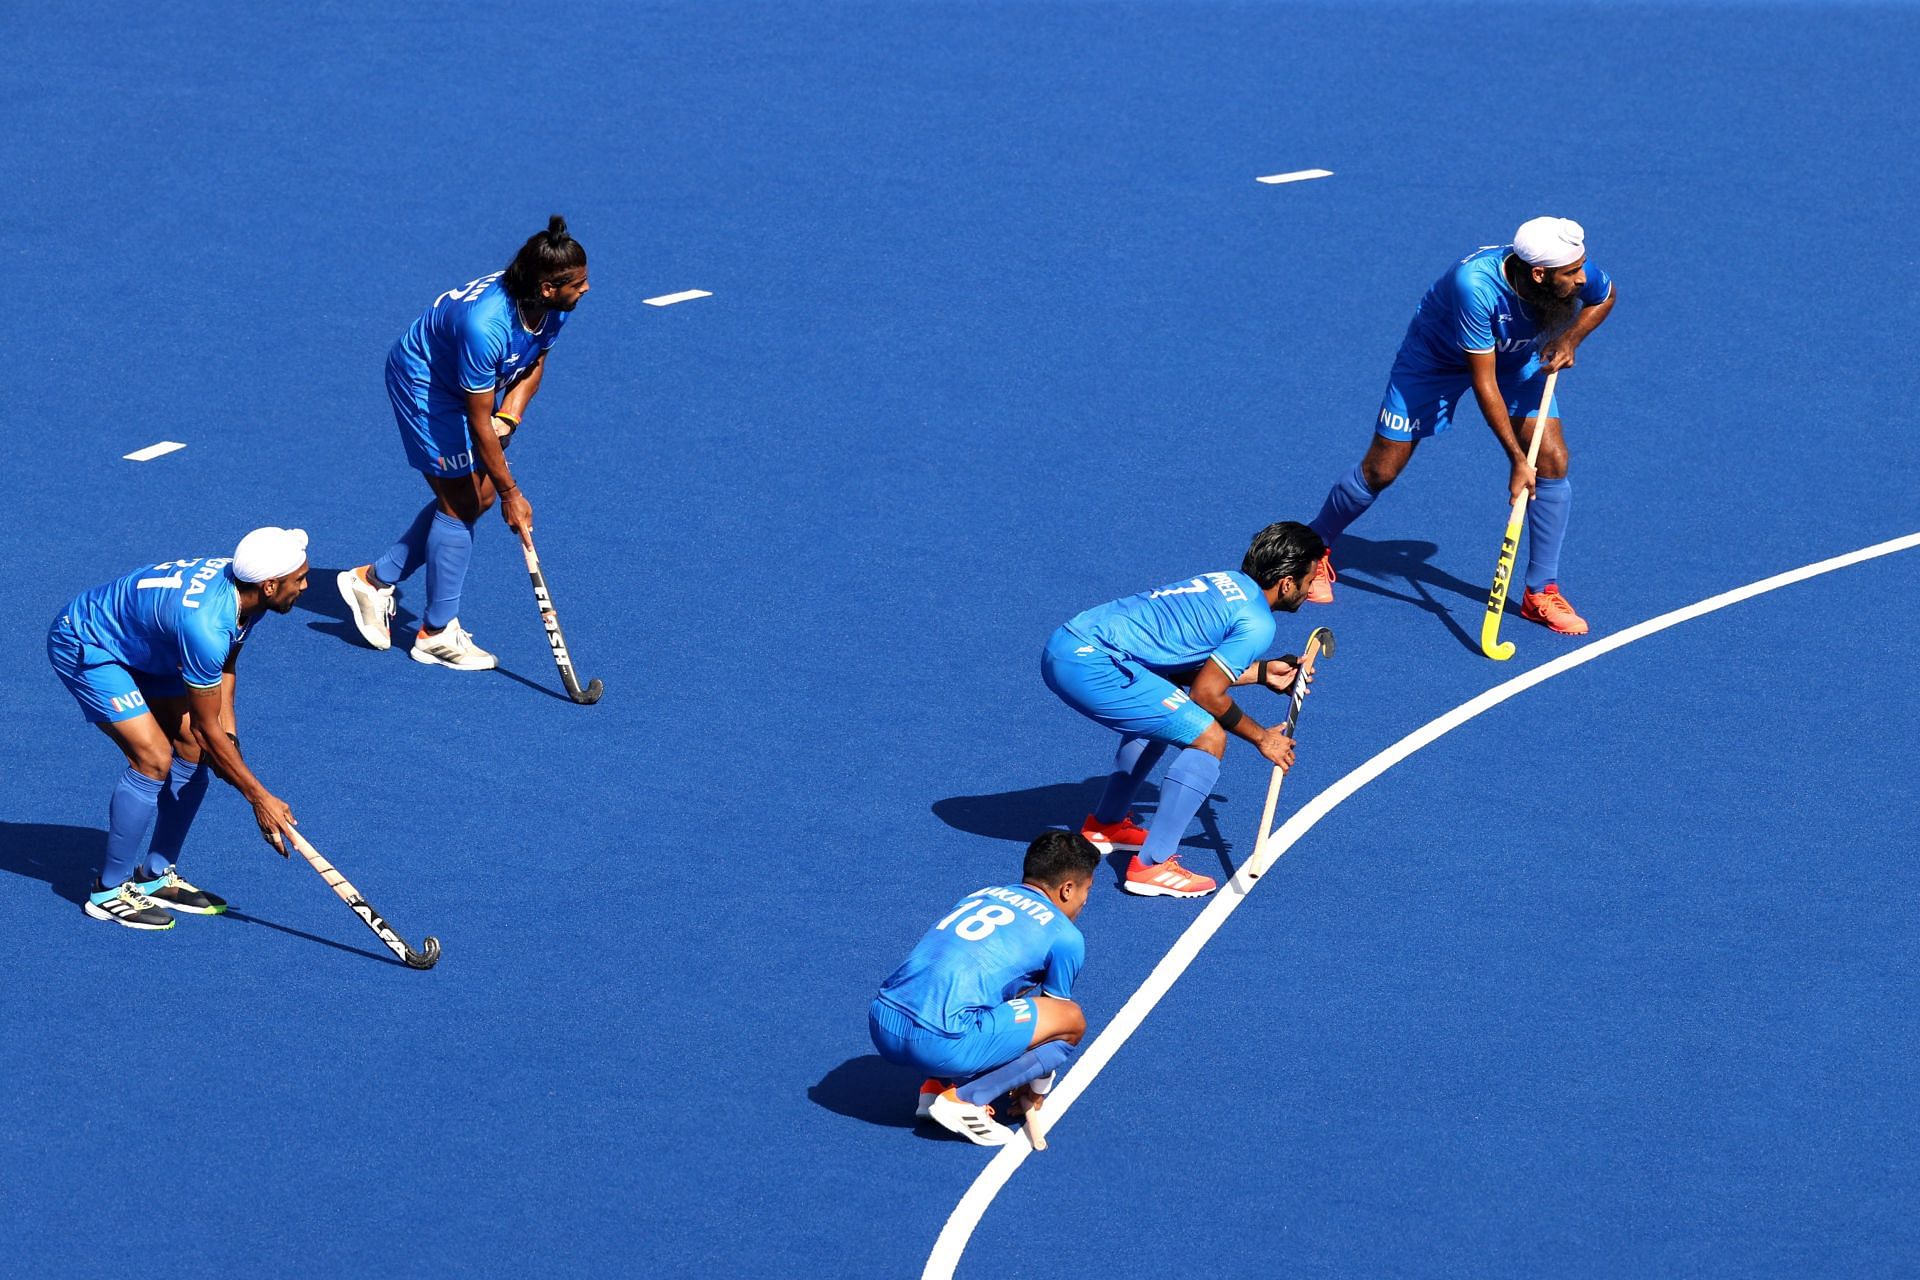 Hockey - Commonwealth Games: Day 4 (Image Courtesy: Getty)